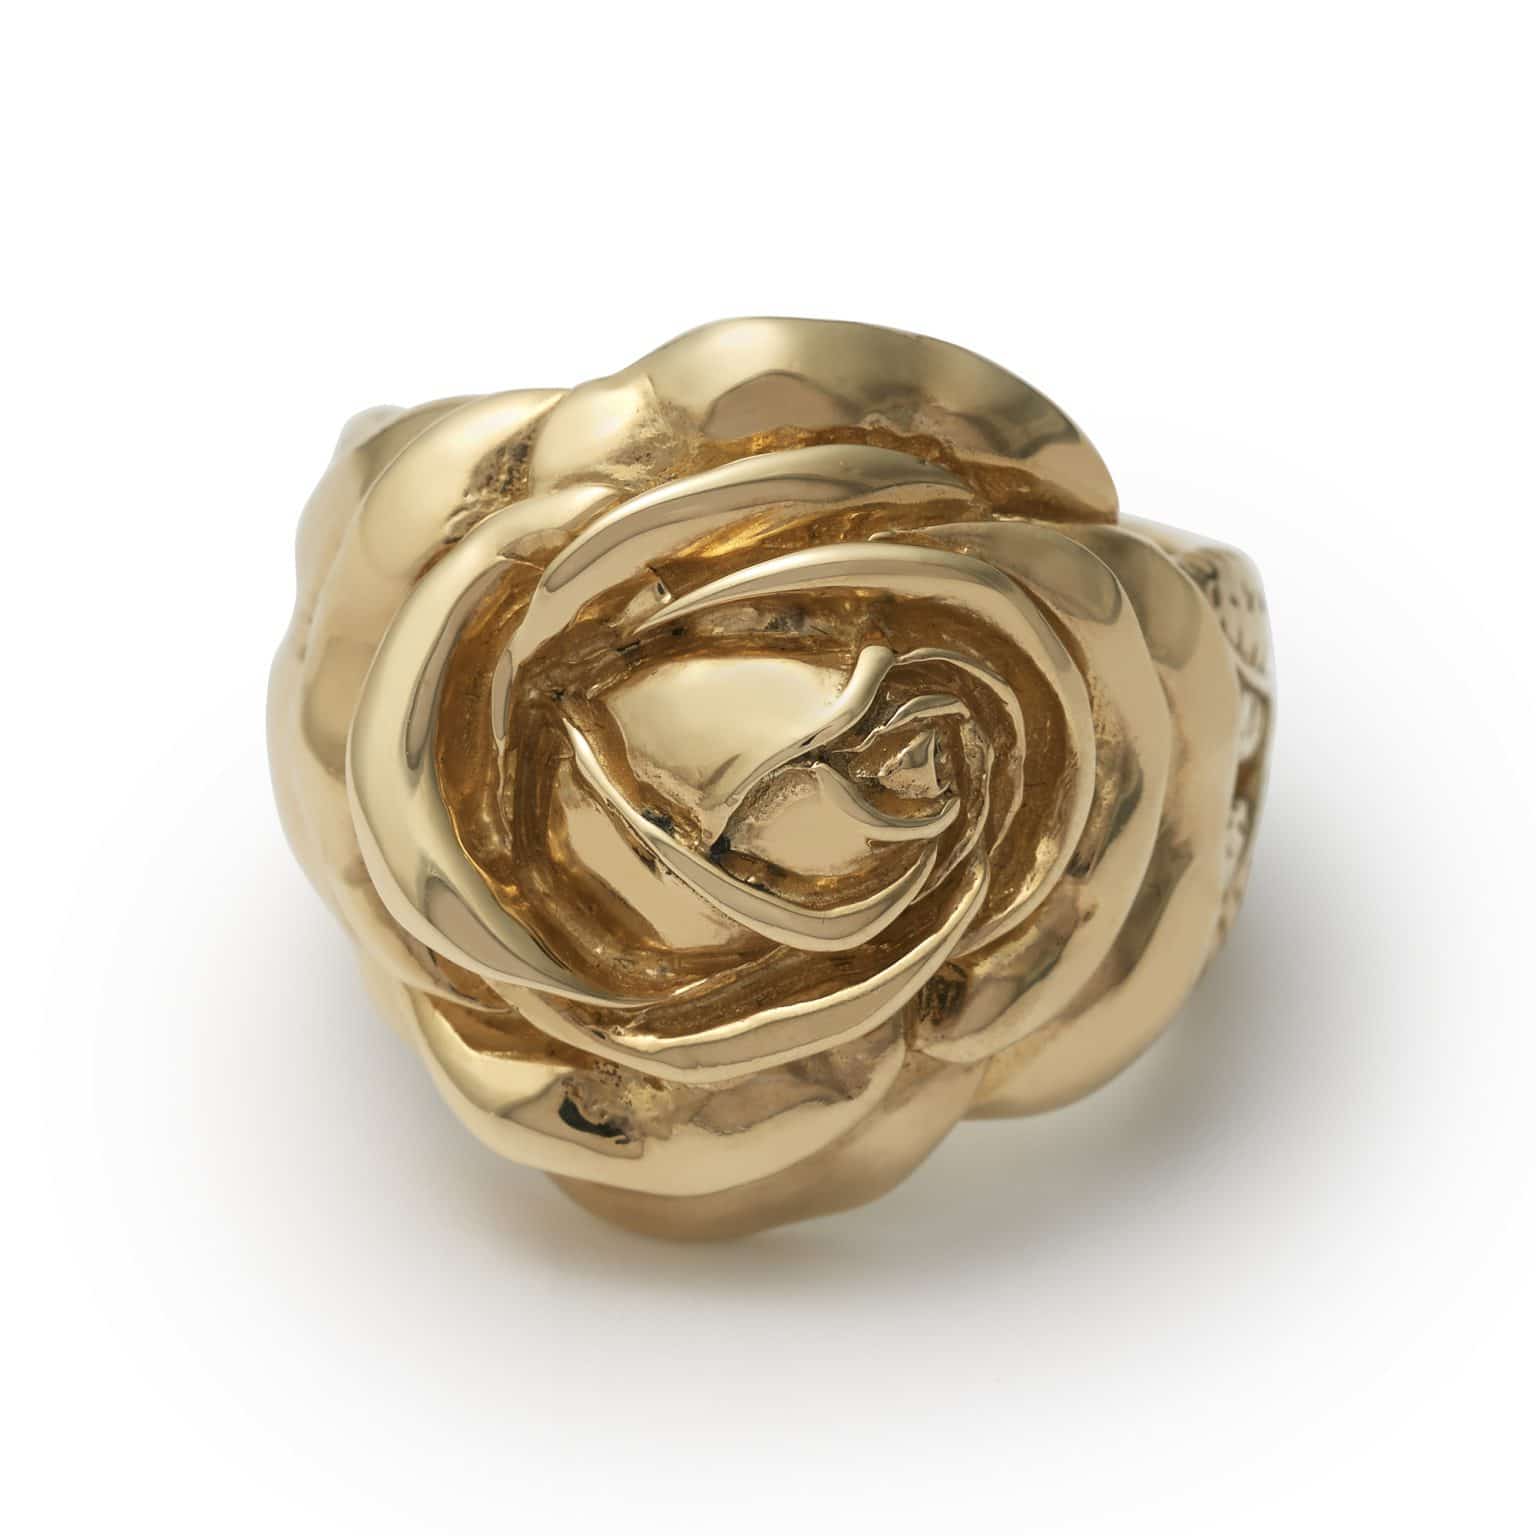 Solid 9ct Gold Rose Ring - The Great Frog London - USA